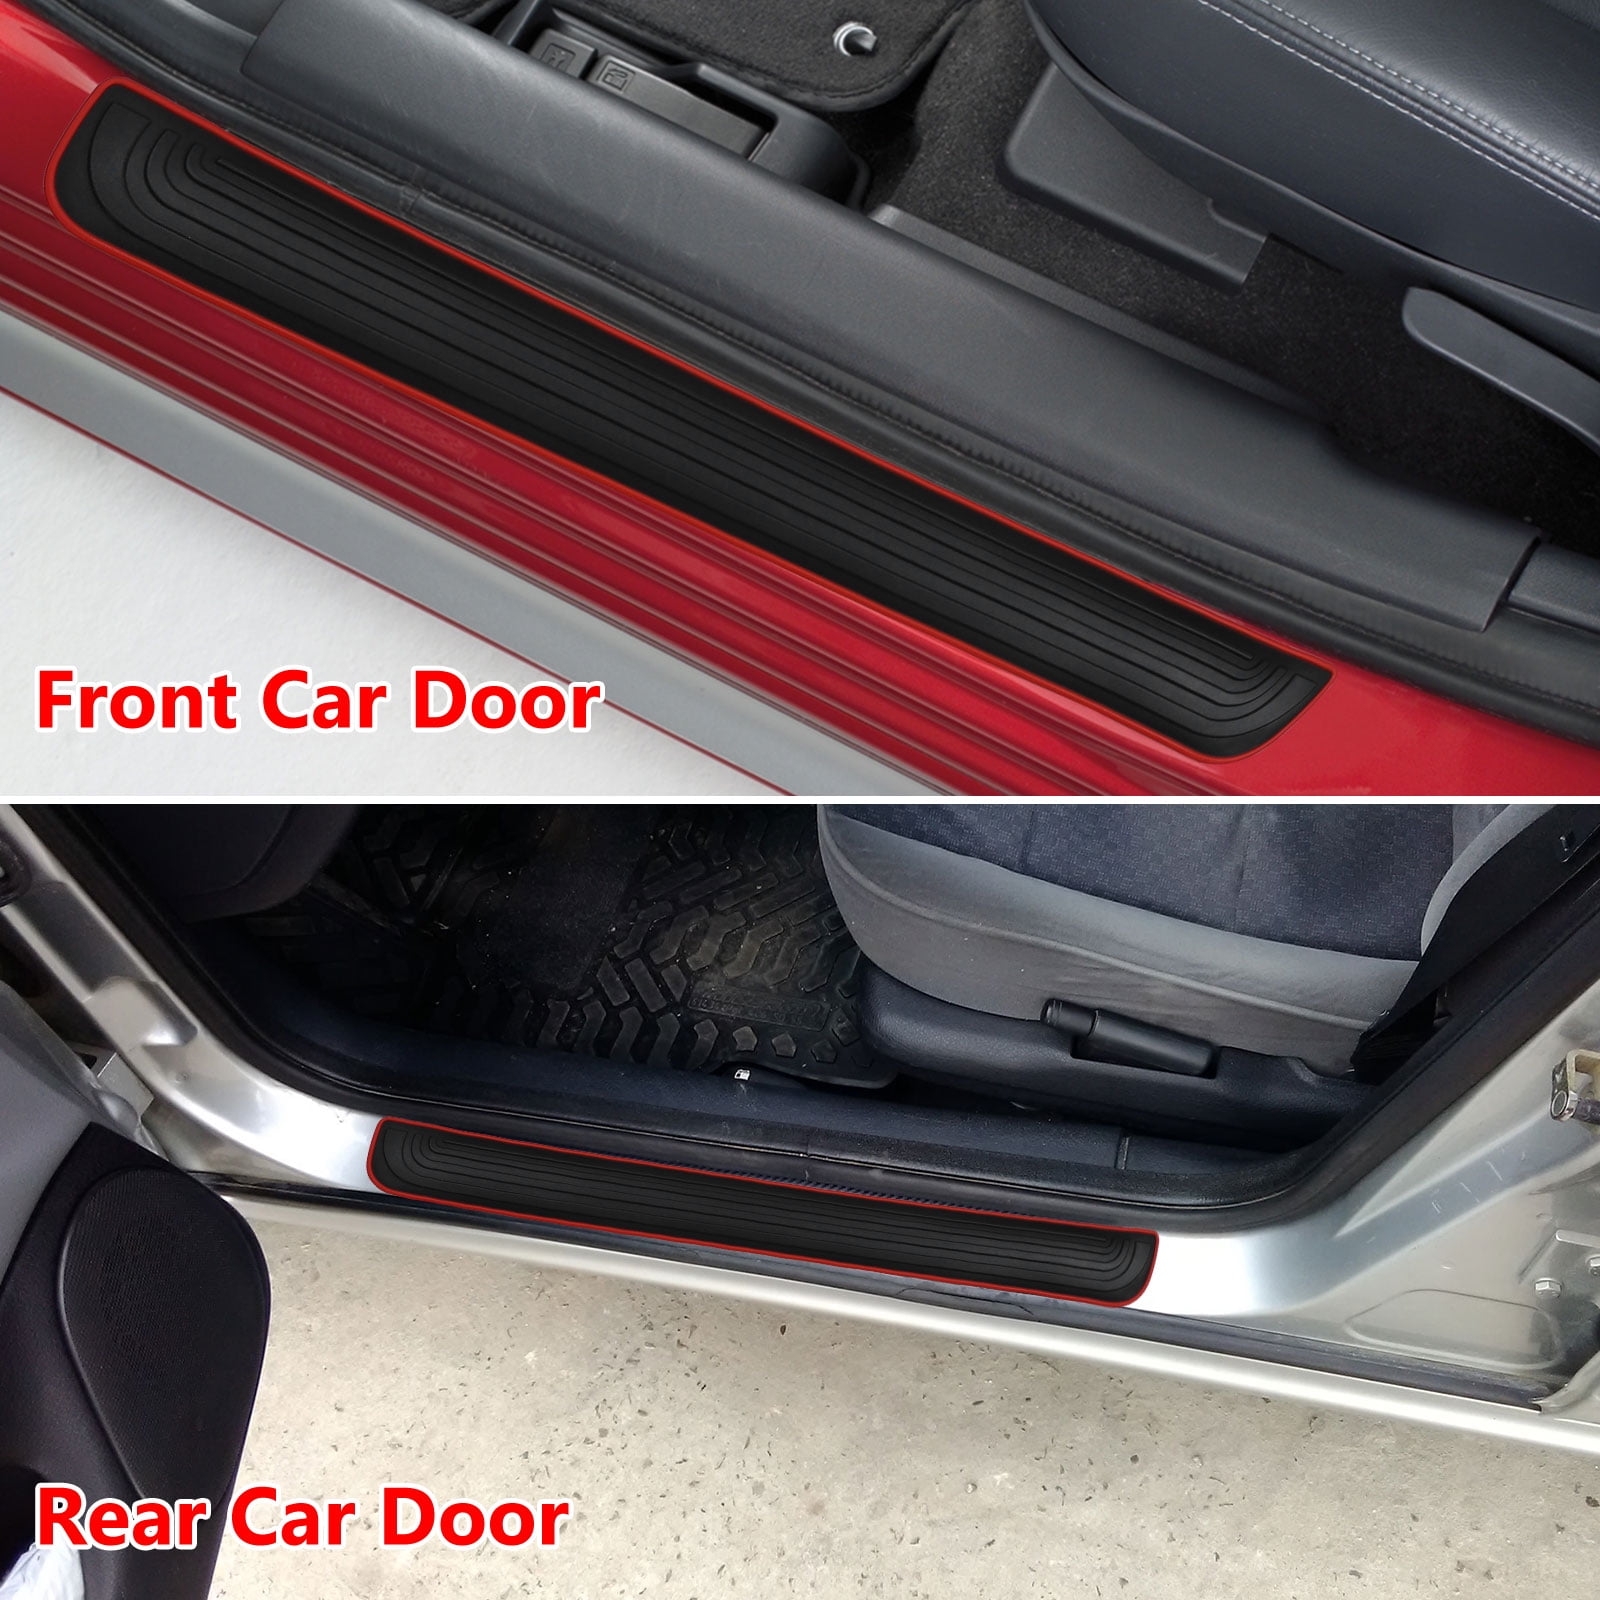 Bettway 4pcs/Set Car Door Sill Plate Protectors fit for Hyundai Black PVC Soft Rubber Front/Rear Door Sill Scuff Plate Guard Welcome Pedal Protector Cover 